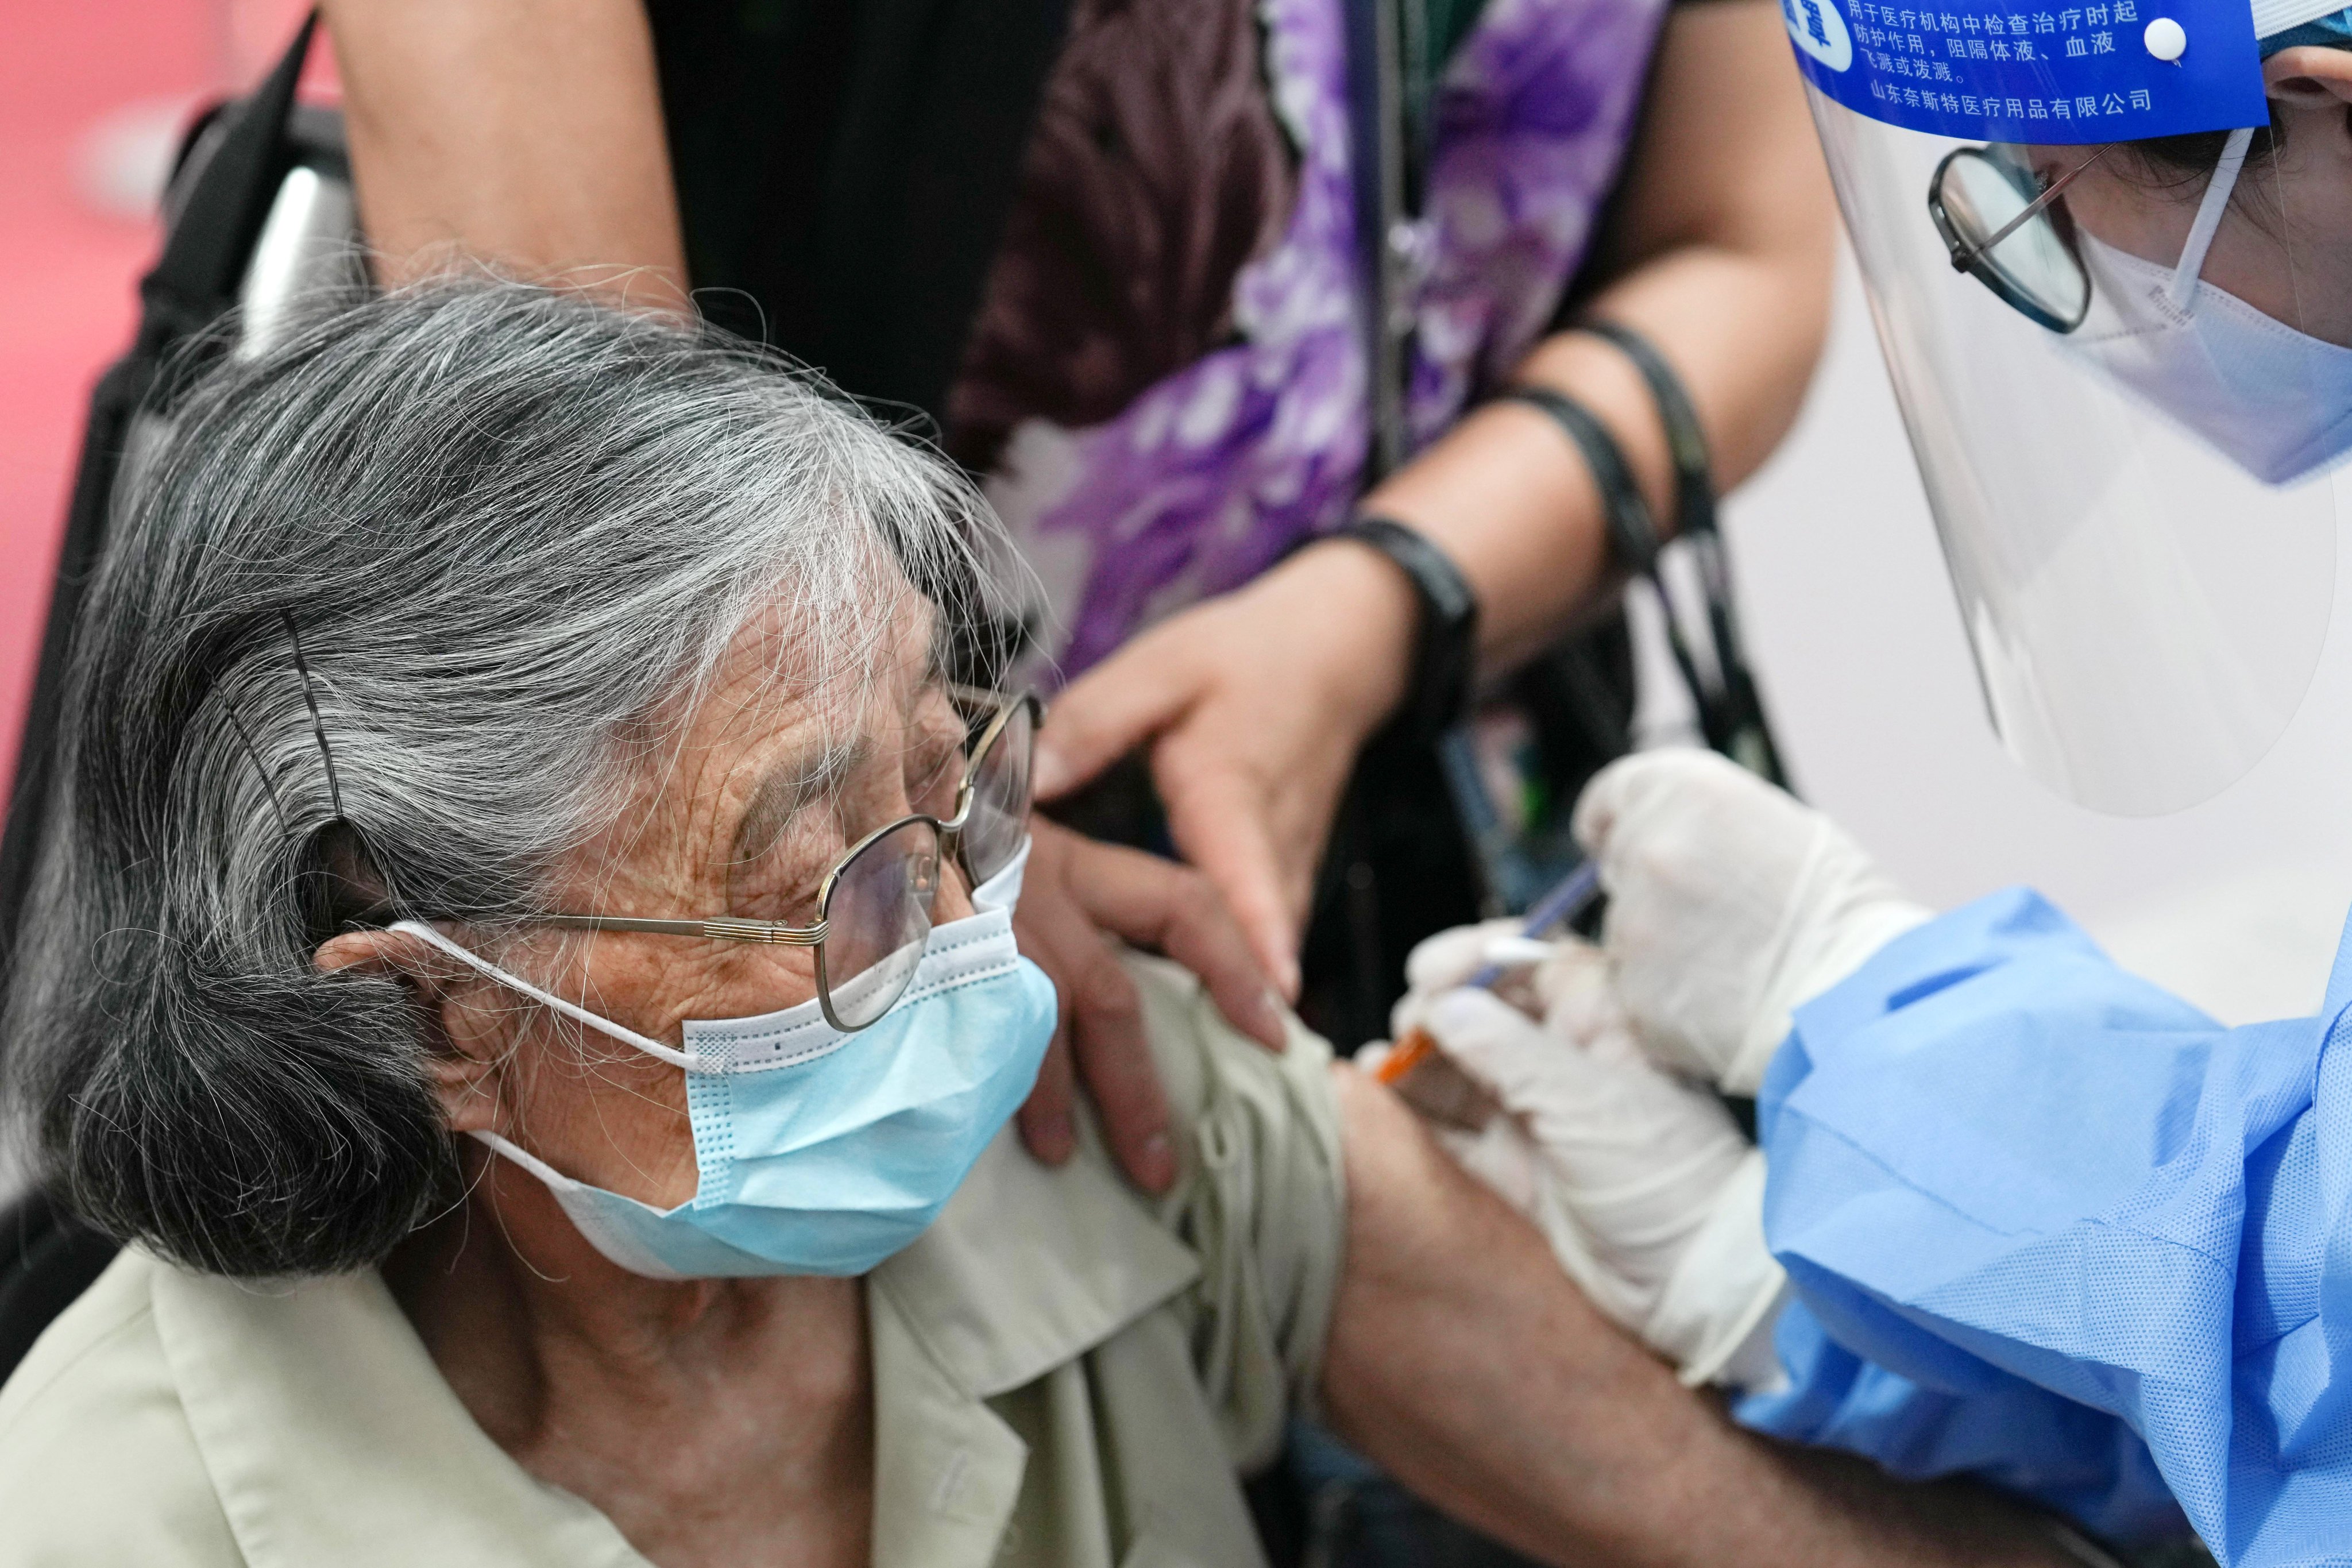 An 89-year-old woman receives a Covid-19 vaccine booster shot at a clinic in Beijing. Photo: Xinhua